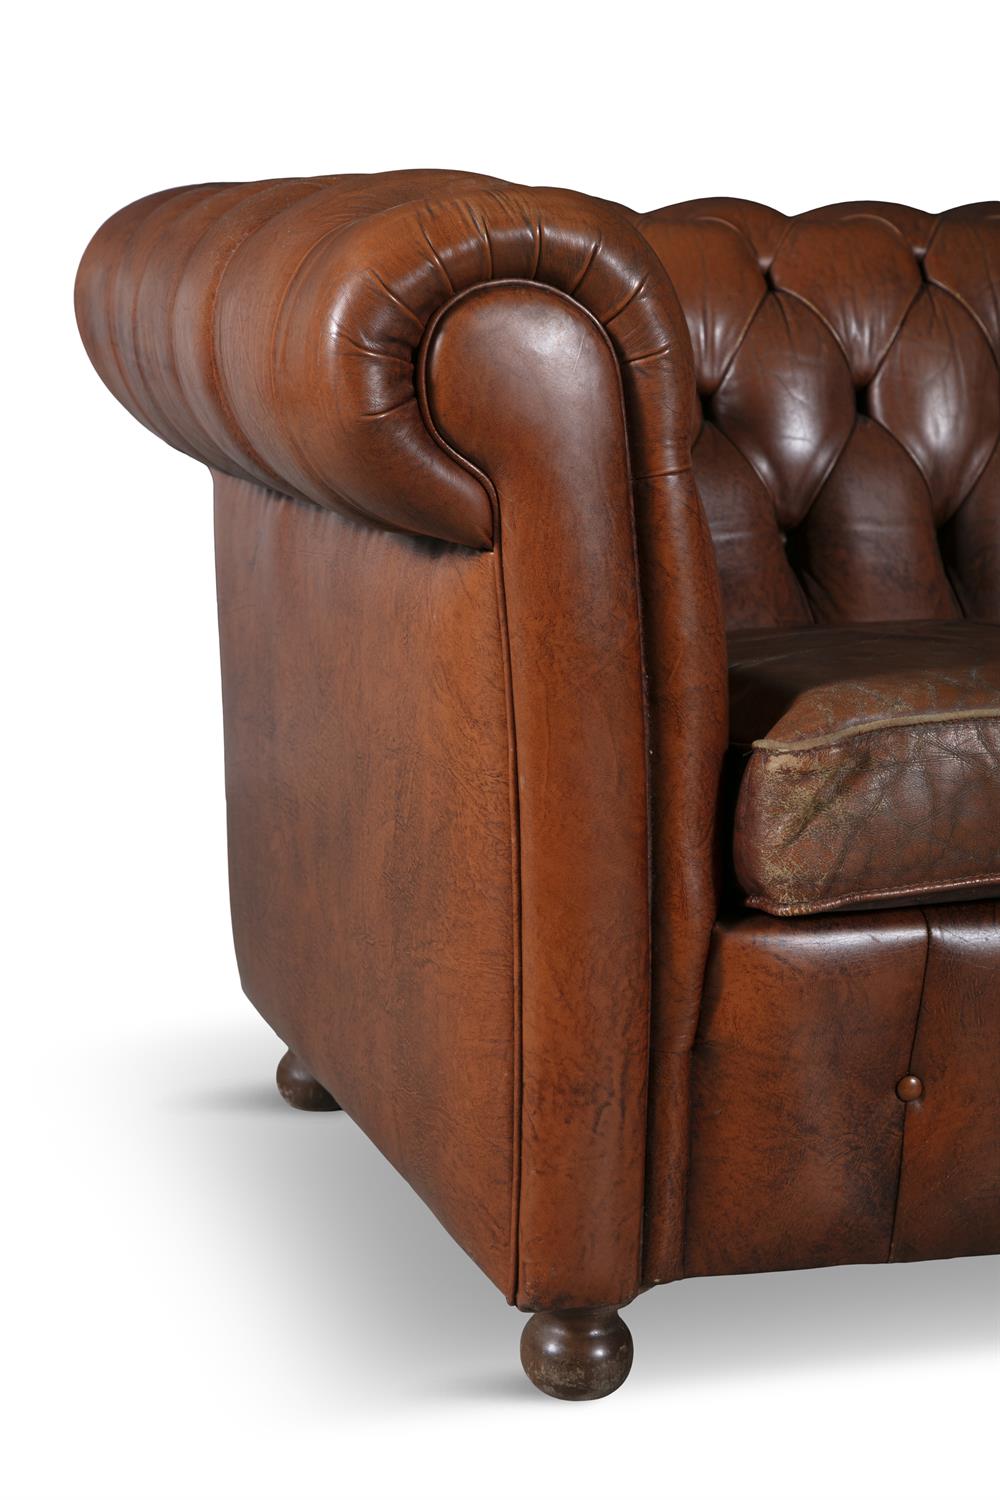 A CHESTERFIELD BUTTON BACK THREE SEATER SOFA, upholstered in brown leather with scroll-end - Image 3 of 18